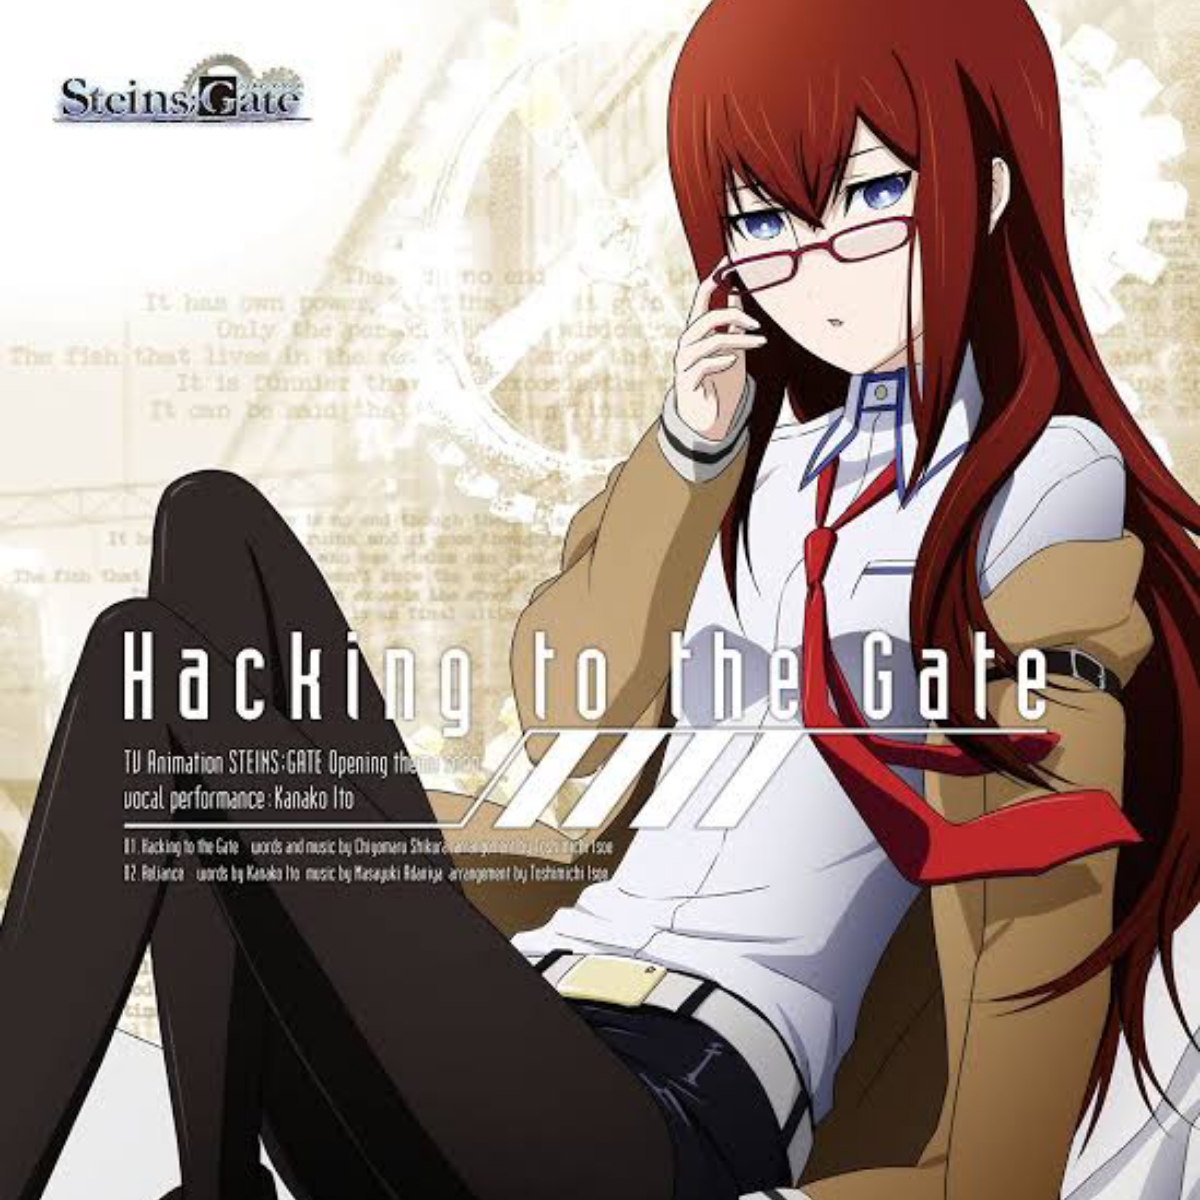 Hacking to the Gate - Osanime